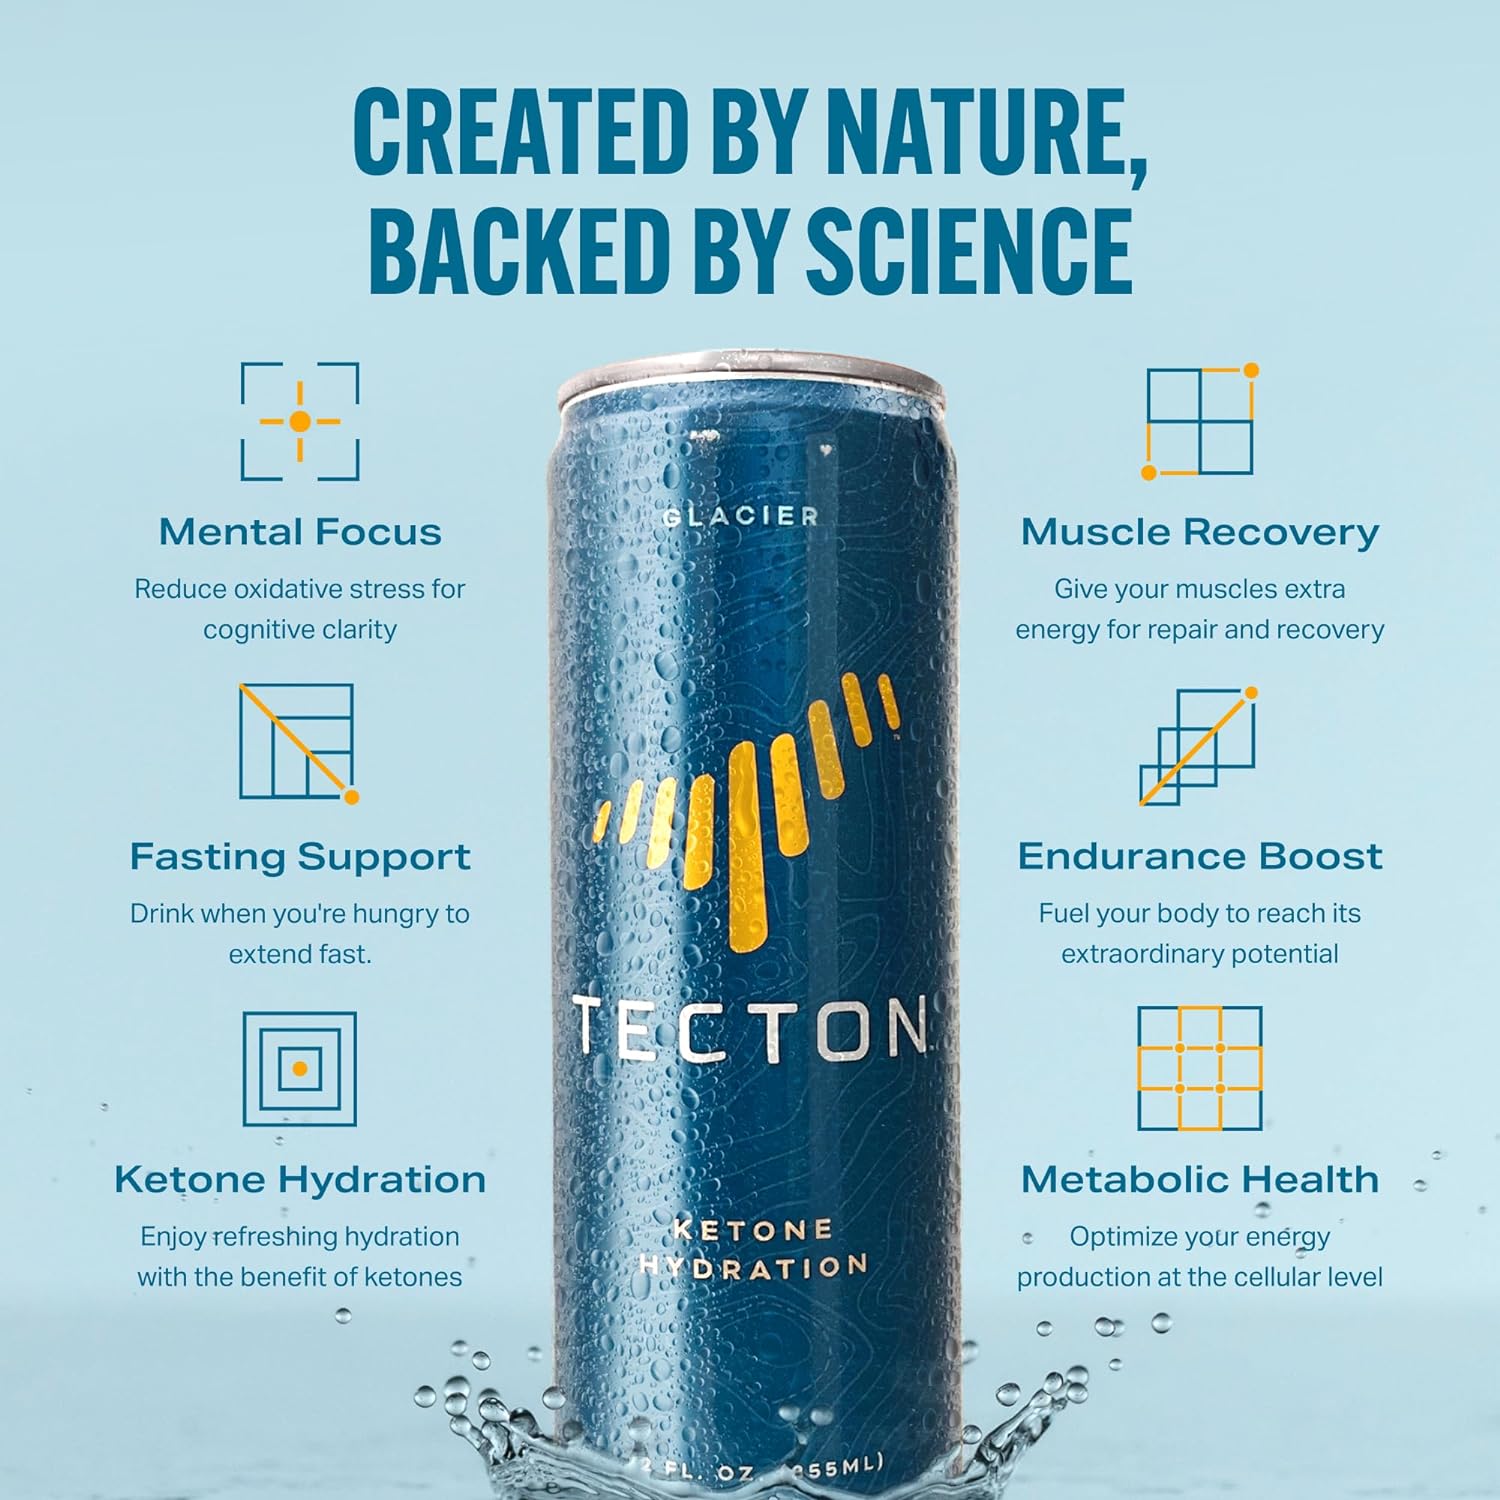 Tecton: Created by Nature, Backed by Science